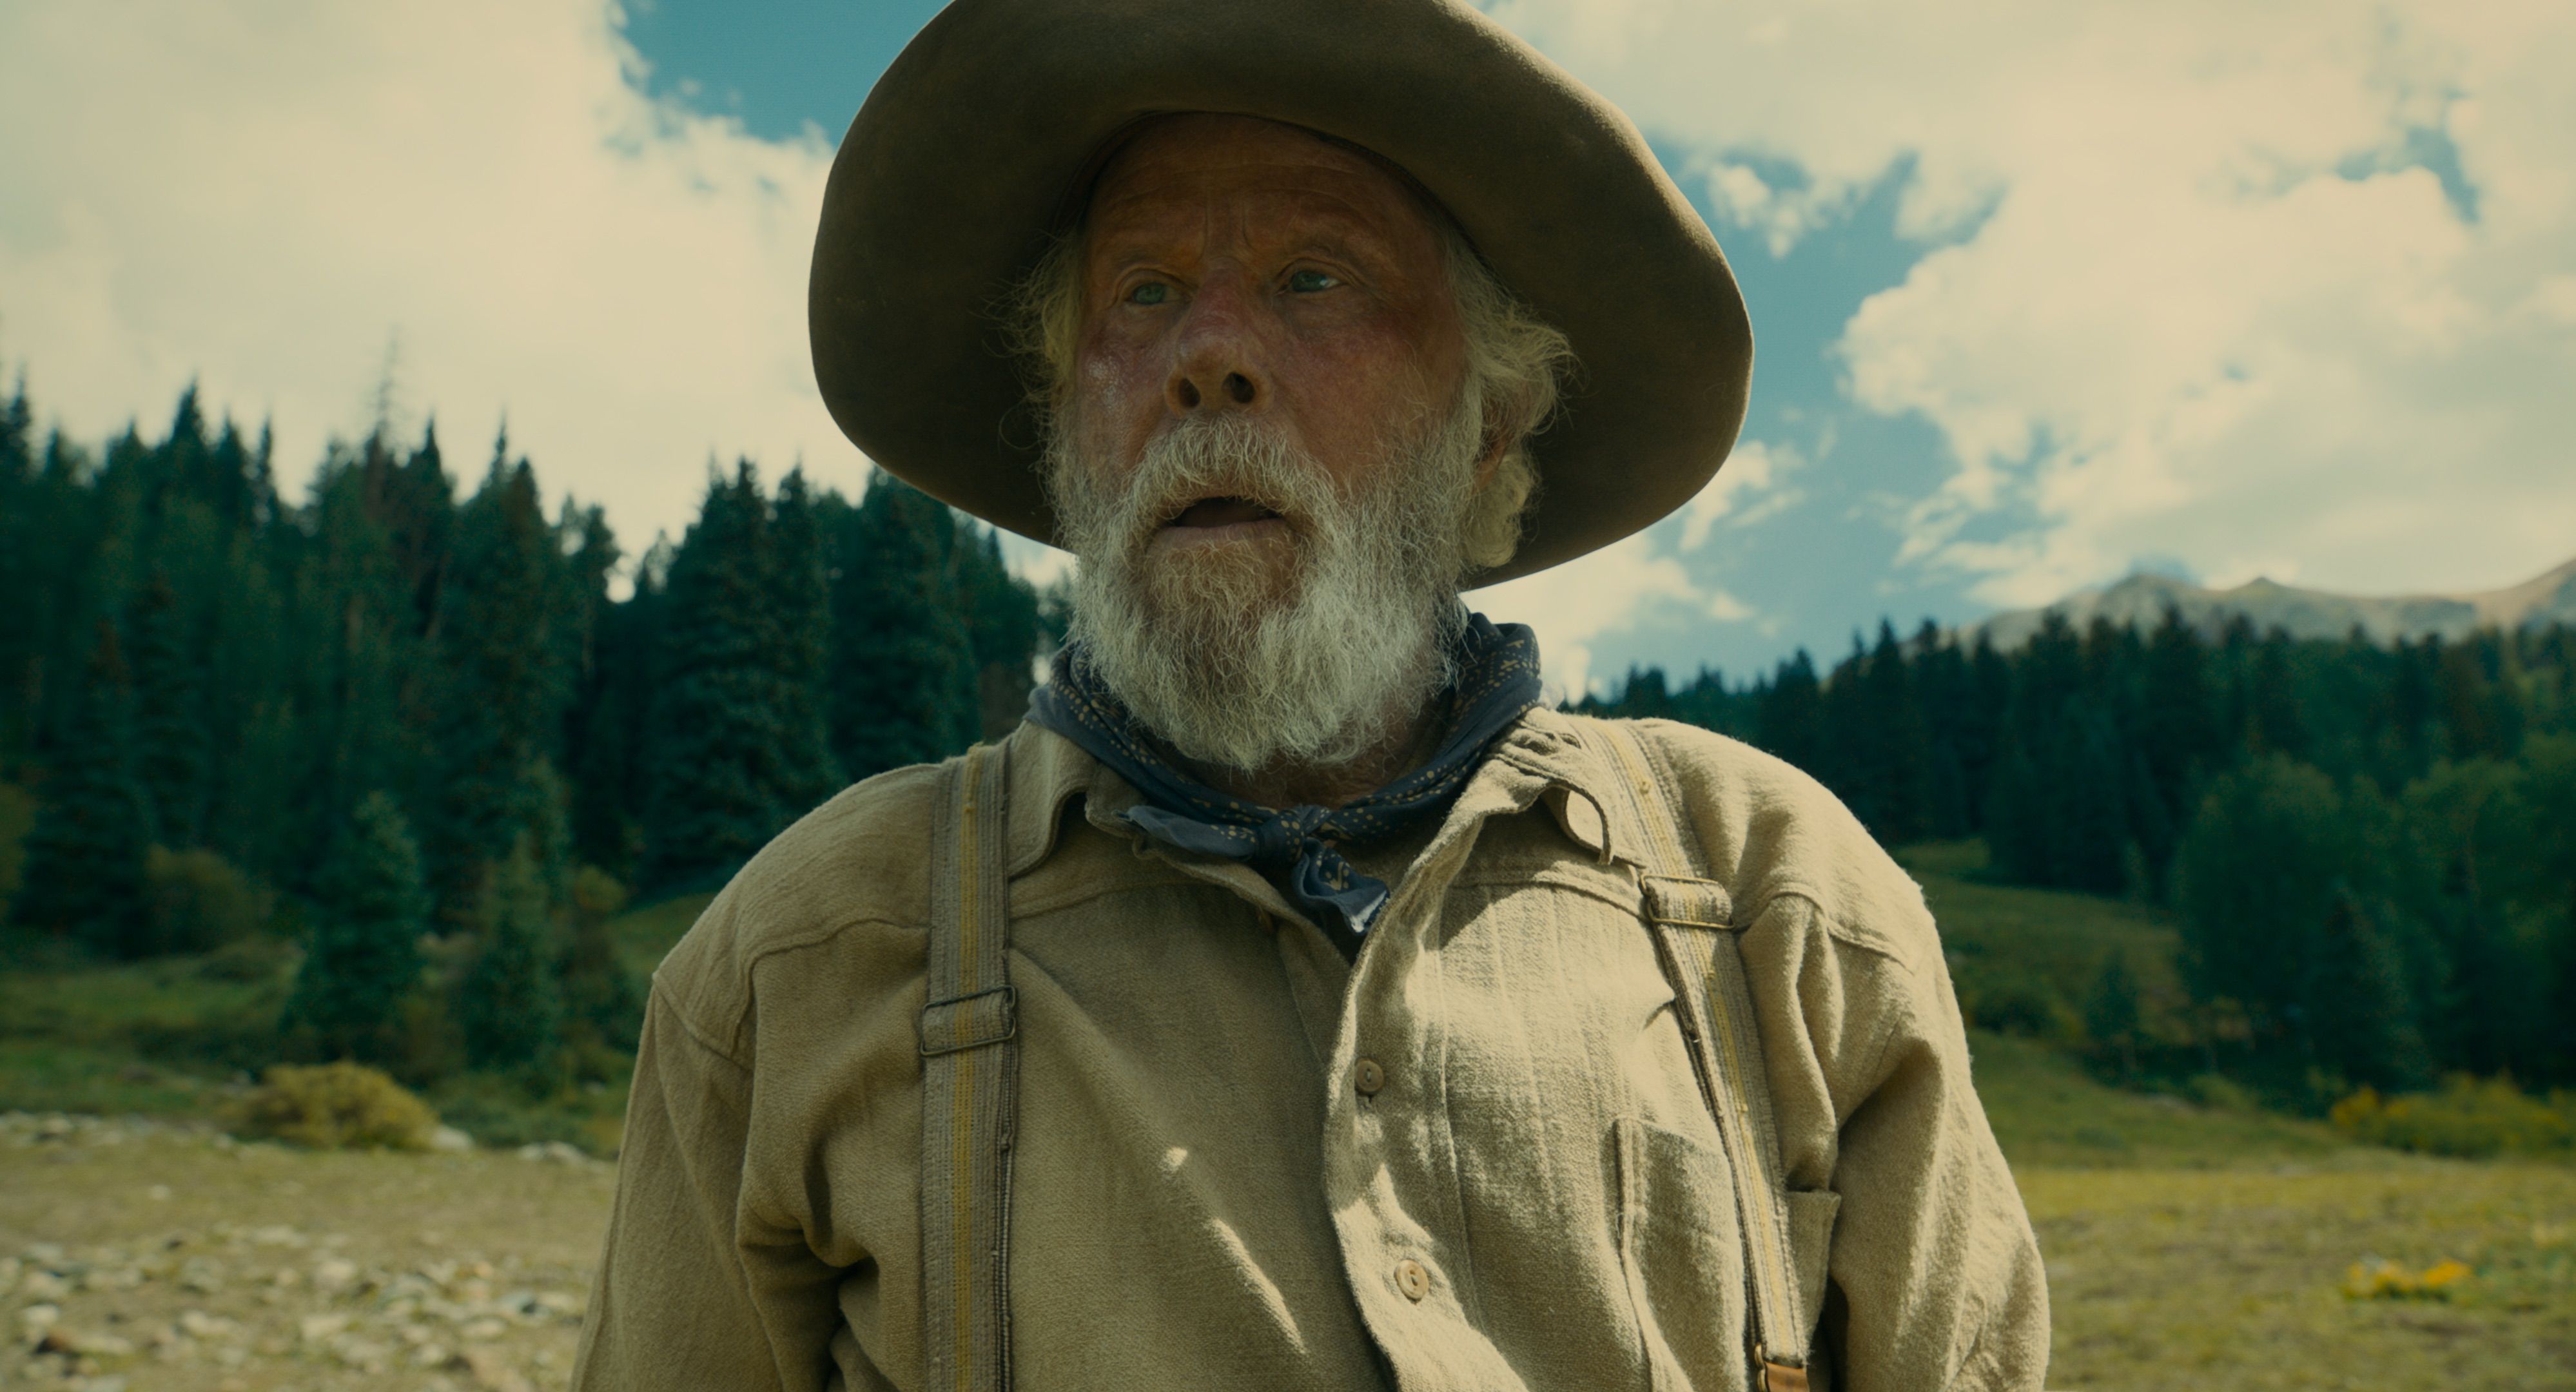 The Ballad of Buster Scruggs: Coen Brothers Push Western